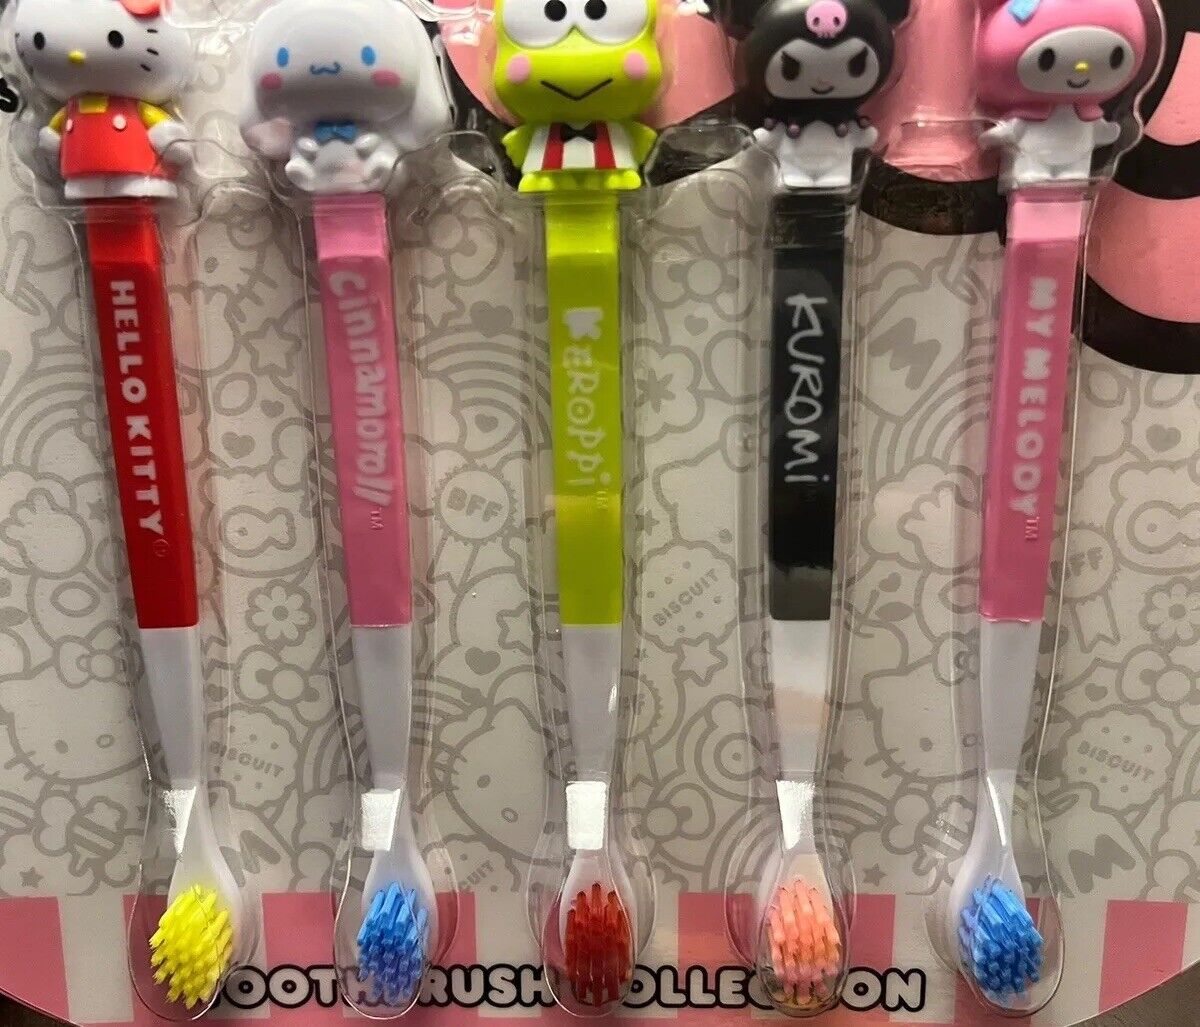 HELLO KITTY AND FRIENDS TOOTHBRUSH COLLECTION SET